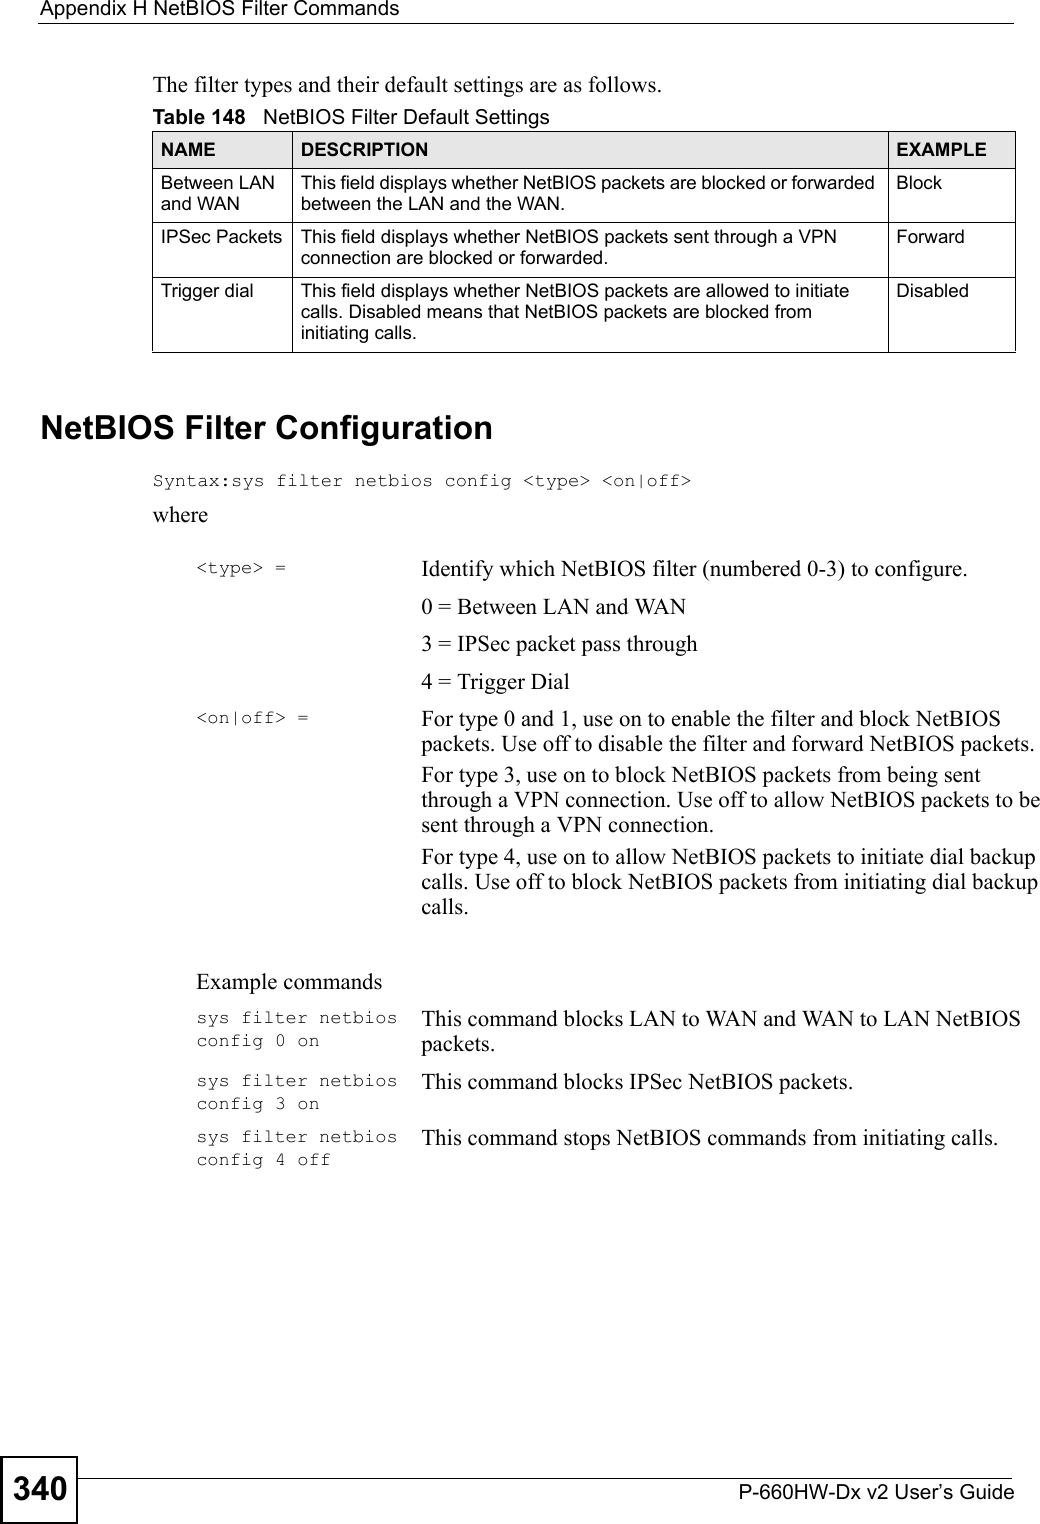 Appendix H NetBIOS Filter CommandsP-660HW-Dx v2 User’s Guide340The filter types and their default settings are as follows.NetBIOS Filter ConfigurationSyntax:sys filter netbios config &lt;type&gt; &lt;on|off&gt;whereTable 148   NetBIOS Filter Default SettingsNAME DESCRIPTION EXAMPLEBetween LAN and WANThis field displays whether NetBIOS packets are blocked or forwarded between the LAN and the WAN.BlockIPSec Packets This field displays whether NetBIOS packets sent through a VPN connection are blocked or forwarded. ForwardTrigger dial This field displays whether NetBIOS packets are allowed to initiate calls. Disabled means that NetBIOS packets are blocked from initiating calls.Disabled&lt;type&gt; = Identify which NetBIOS filter (numbered 0-3) to configure.0 = Between LAN and WAN3 = IPSec packet pass through4 = Trigger Dial&lt;on|off&gt; = For type 0 and 1, use on to enable the filter and block NetBIOS packets. Use off to disable the filter and forward NetBIOS packets.For type 3, use on to block NetBIOS packets from being sent through a VPN connection. Use off to allow NetBIOS packets to be sent through a VPN connection.For type 4, use on to allow NetBIOS packets to initiate dial backup calls. Use off to block NetBIOS packets from initiating dial backup calls.Example commandssys filter netbios config 0 onThis command blocks LAN to WAN and WAN to LAN NetBIOS packets.sys filter netbios config 3 onThis command blocks IPSec NetBIOS packets.sys filter netbios config 4 offThis command stops NetBIOS commands from initiating calls.